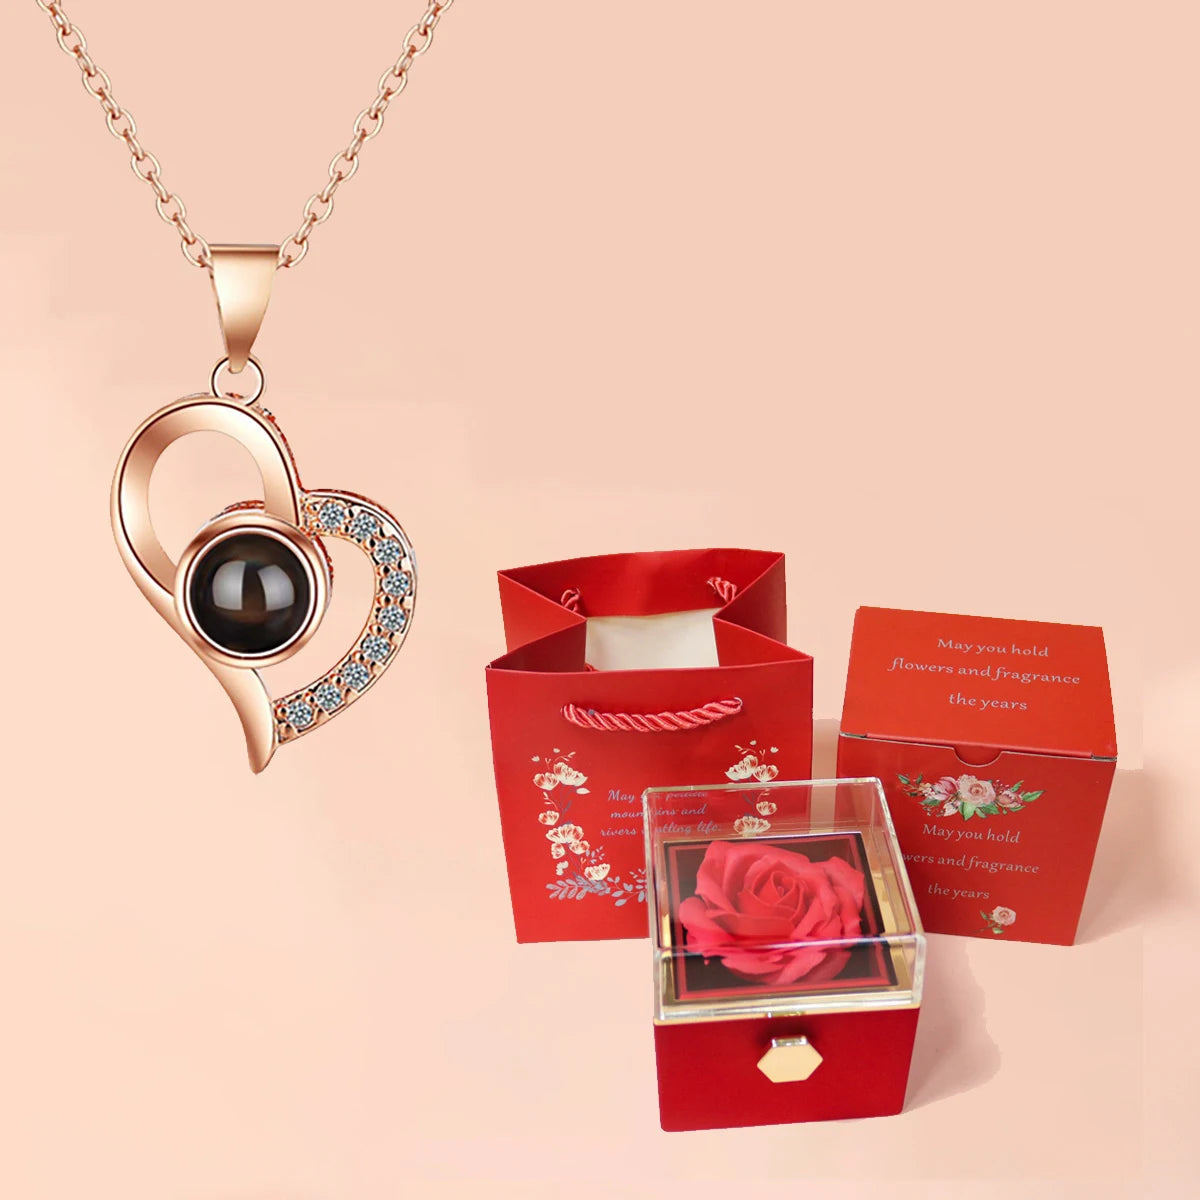 100 Languages I Love You Projection Heart Necklace With Rotating Rose Gift Box Hot Jewelry Set For Women Christmas Gifts Basso & Brooke